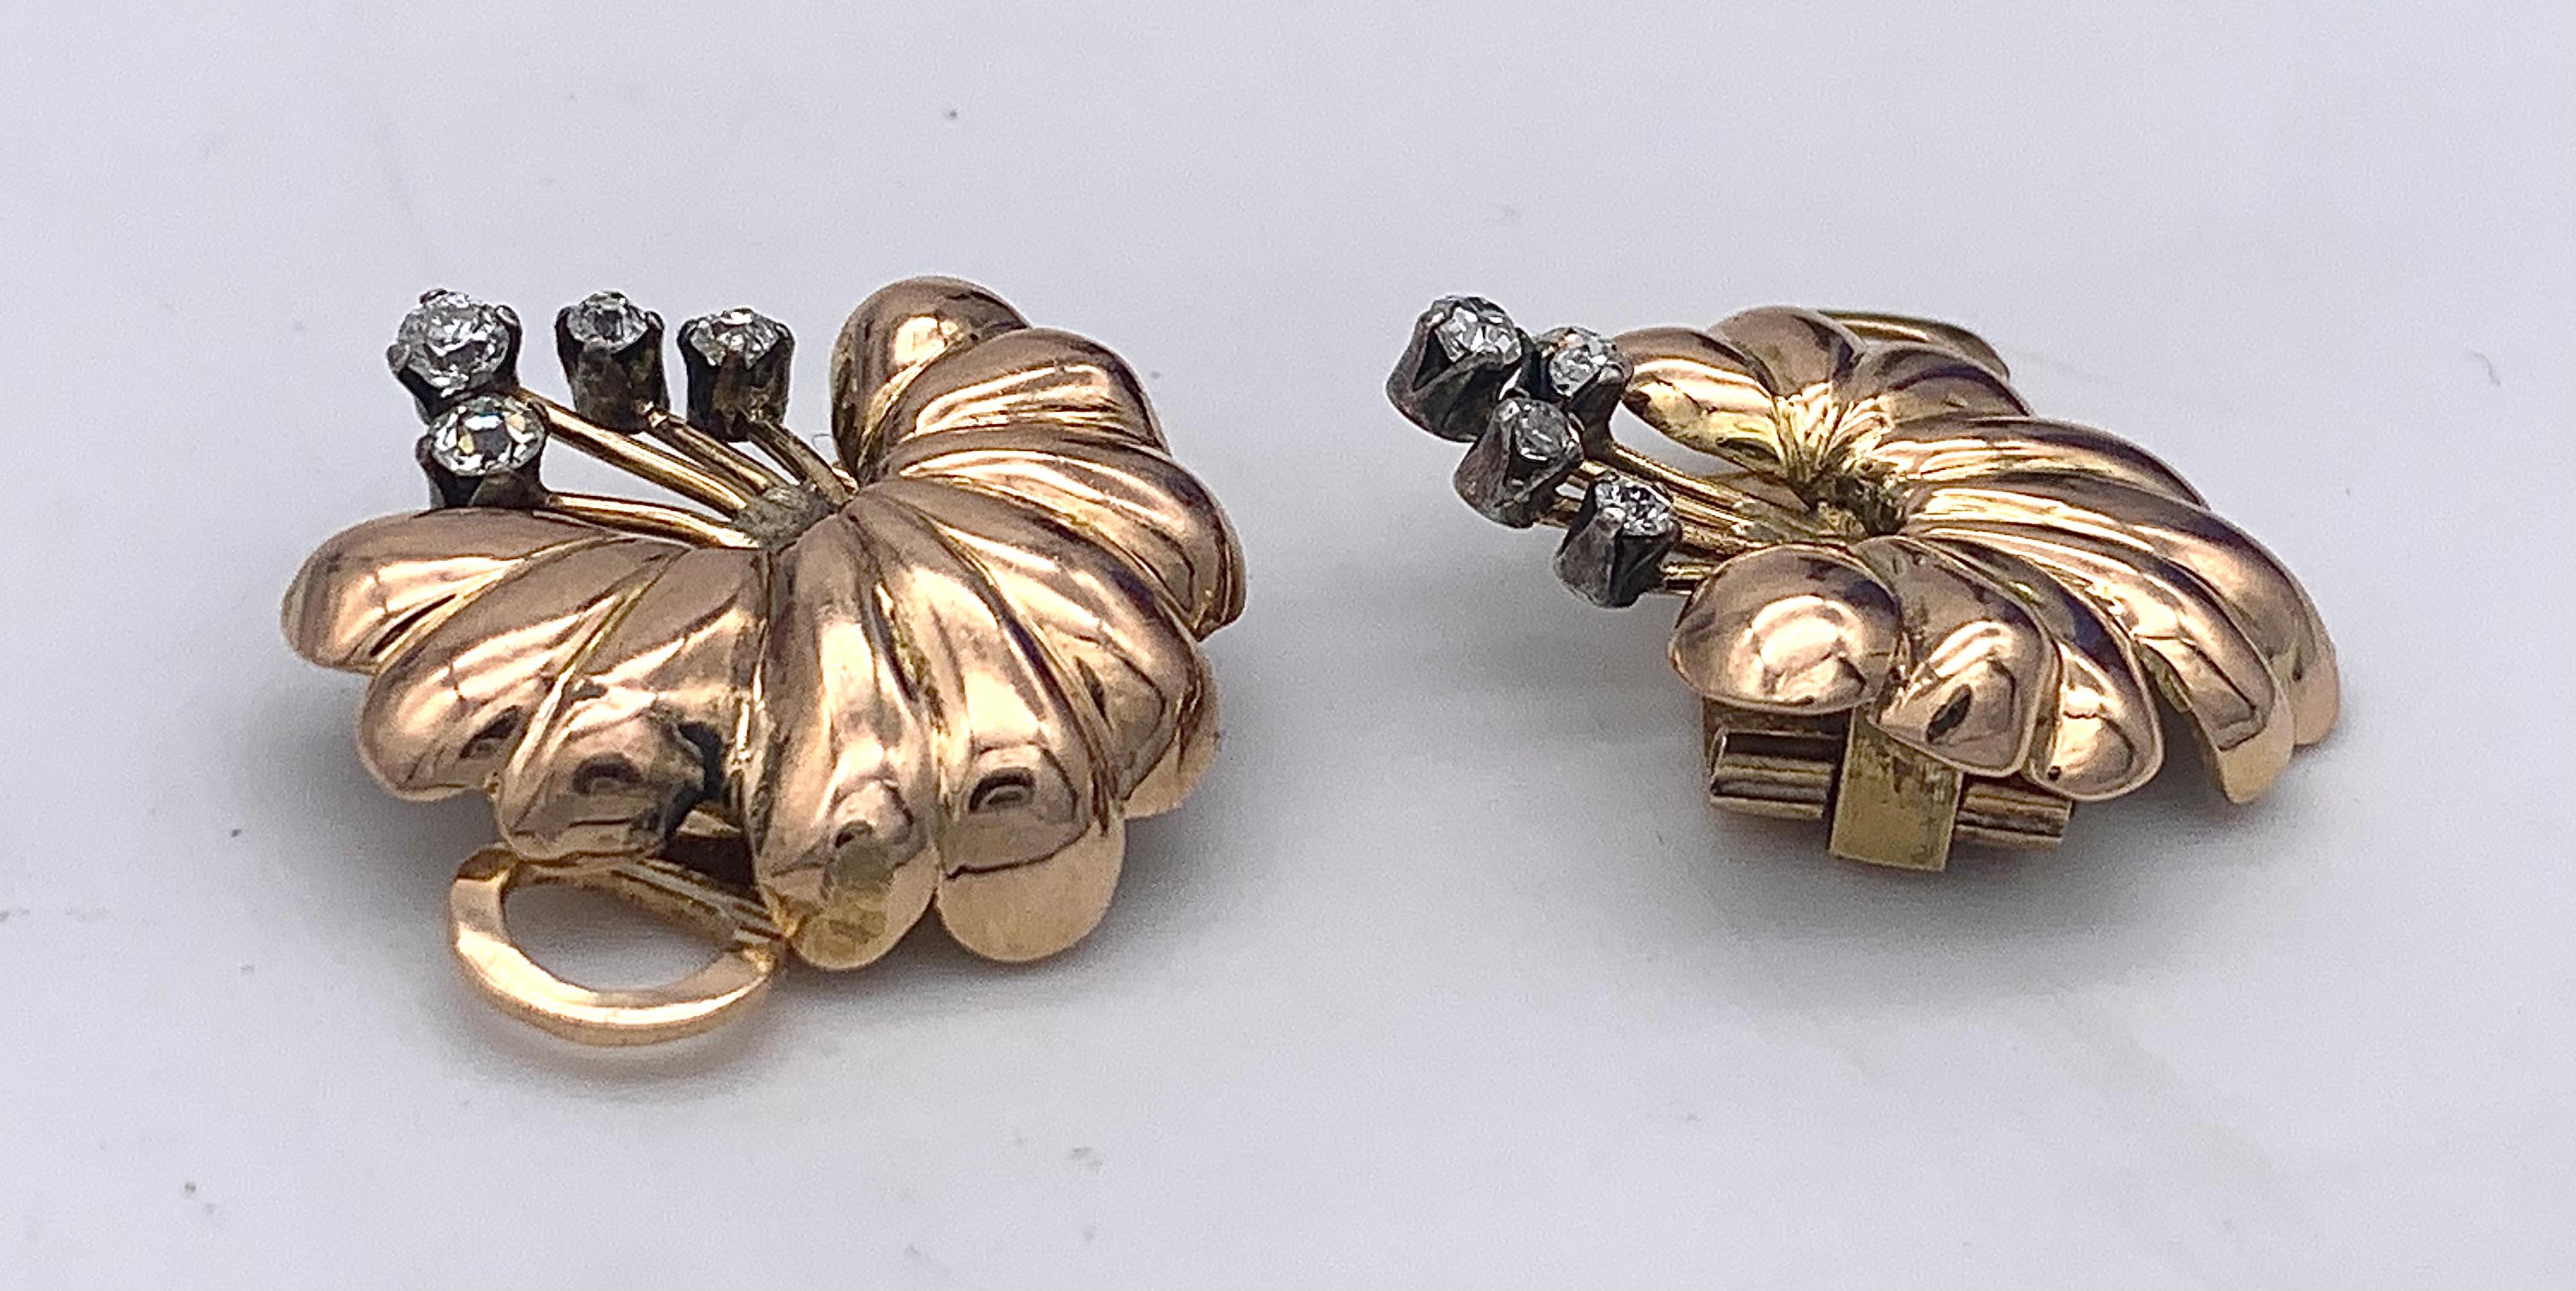 These finely modelled Art Deco clip-on earrings with their expressive flower pistils were executed around 1935. The pistils are decorated with round cut diamonds set in silver.
The earclips are hallmarked on the outside of the clip mechanisms.  